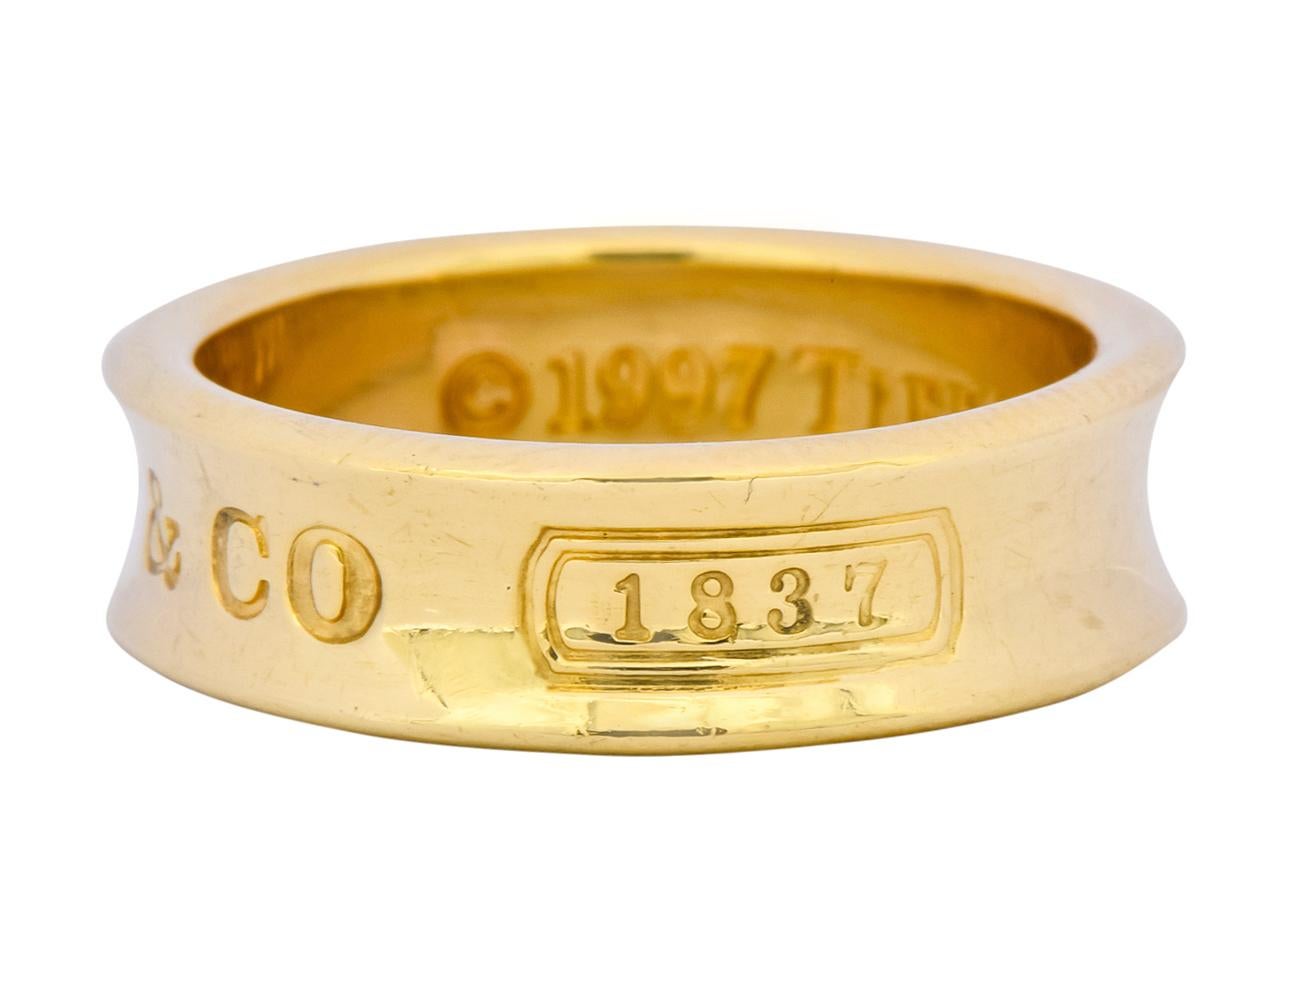 High polished gold band with recessed central groove

Deeply engraved to front 750, T & Co., and 1837

From Tiffany & Co.'s celebratory Tiffany 1837 Collection

Inner shank fully signed Tiffany & Co. 1997

Stamped 750 for 18 karat gold

Ring Size: 6